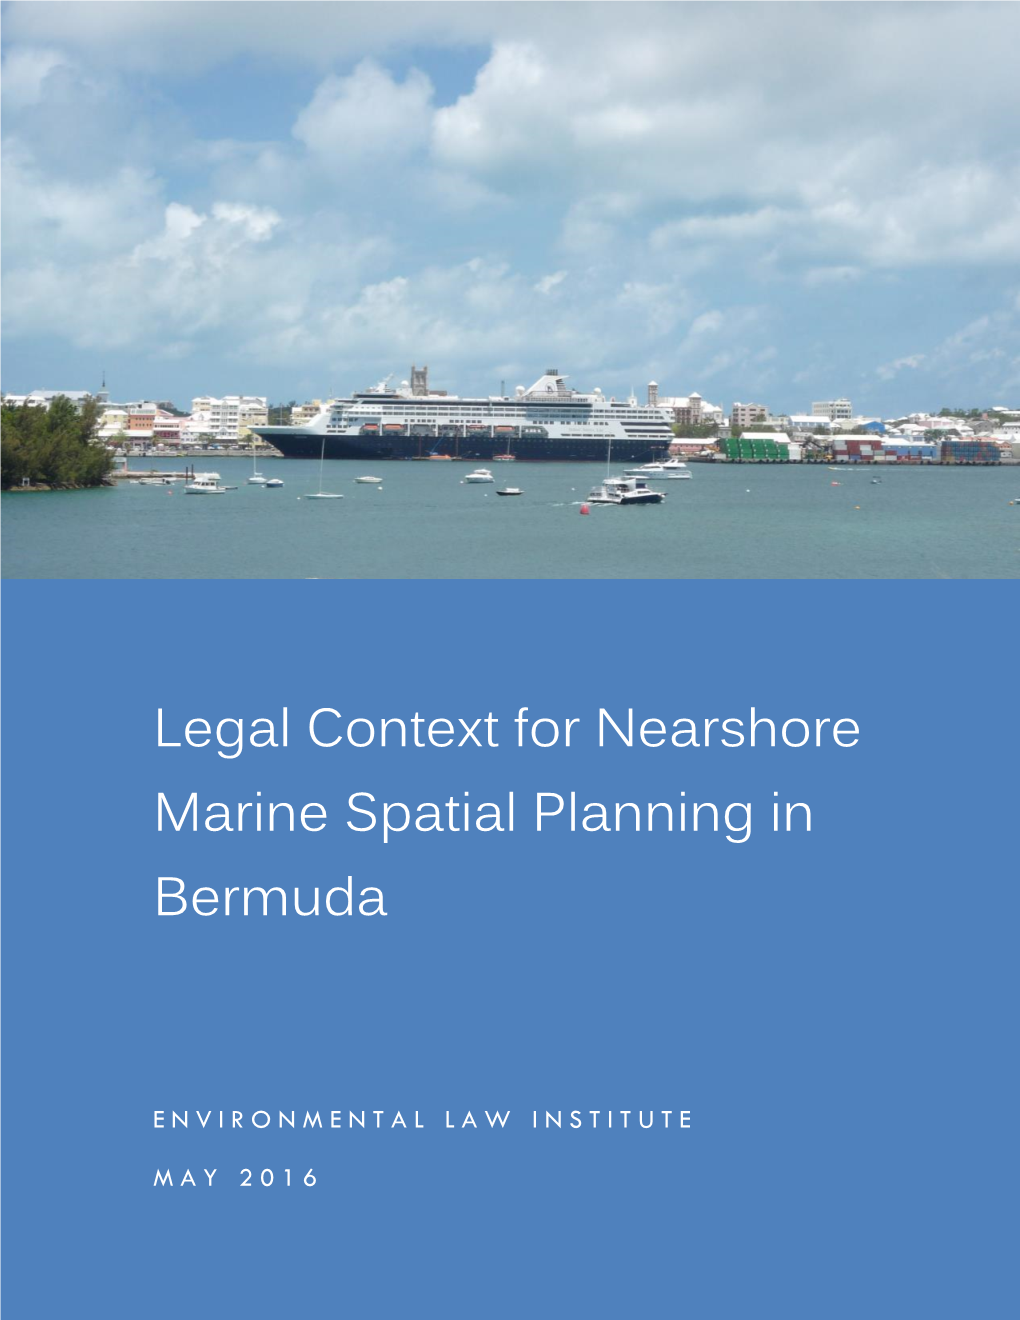 Legal Context for Nearshore Marine Spatial Planning in Bermuda